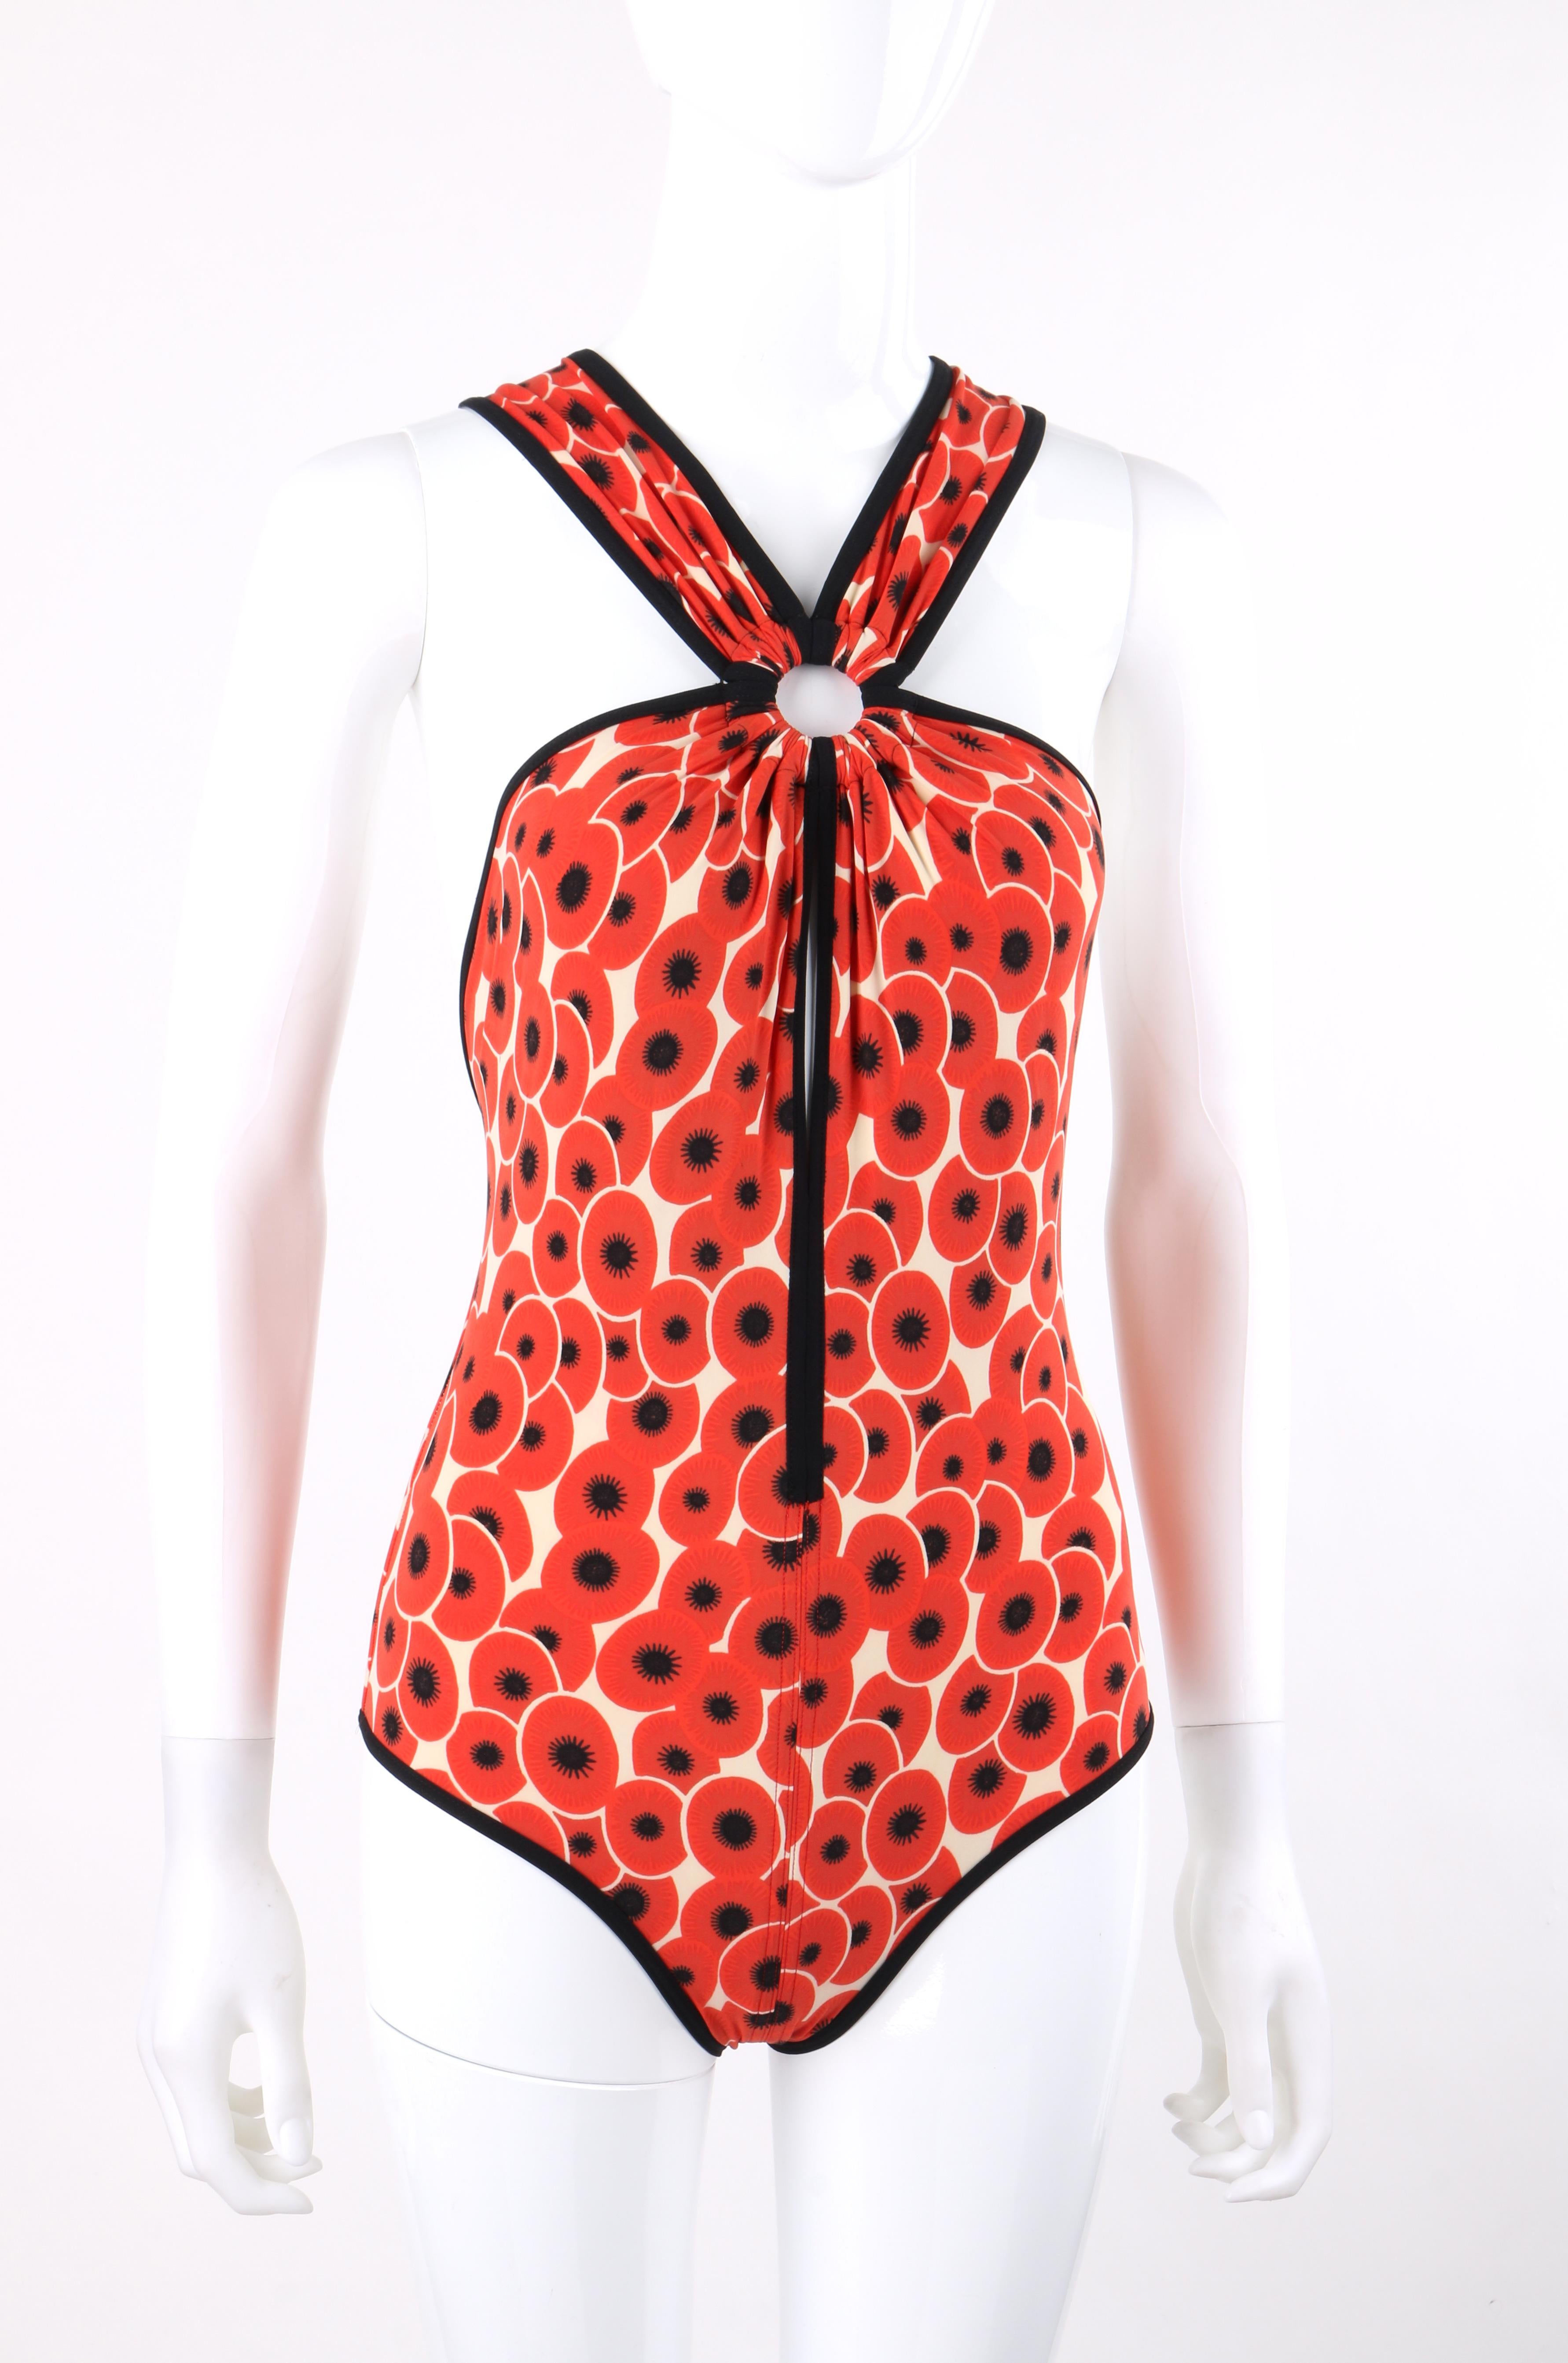 HERMES S/S 2007 Red Poppy Floral Keyhole Halter One-Piece Bathing Suit 
 
Brand / Manufacturer: Hermes
Collection: Spring / Summer 2007
Style: One-piece swimsuit
Color(s): Shades of off white, red and black
Lined: Yes 
Marked Fabric Content: 72%